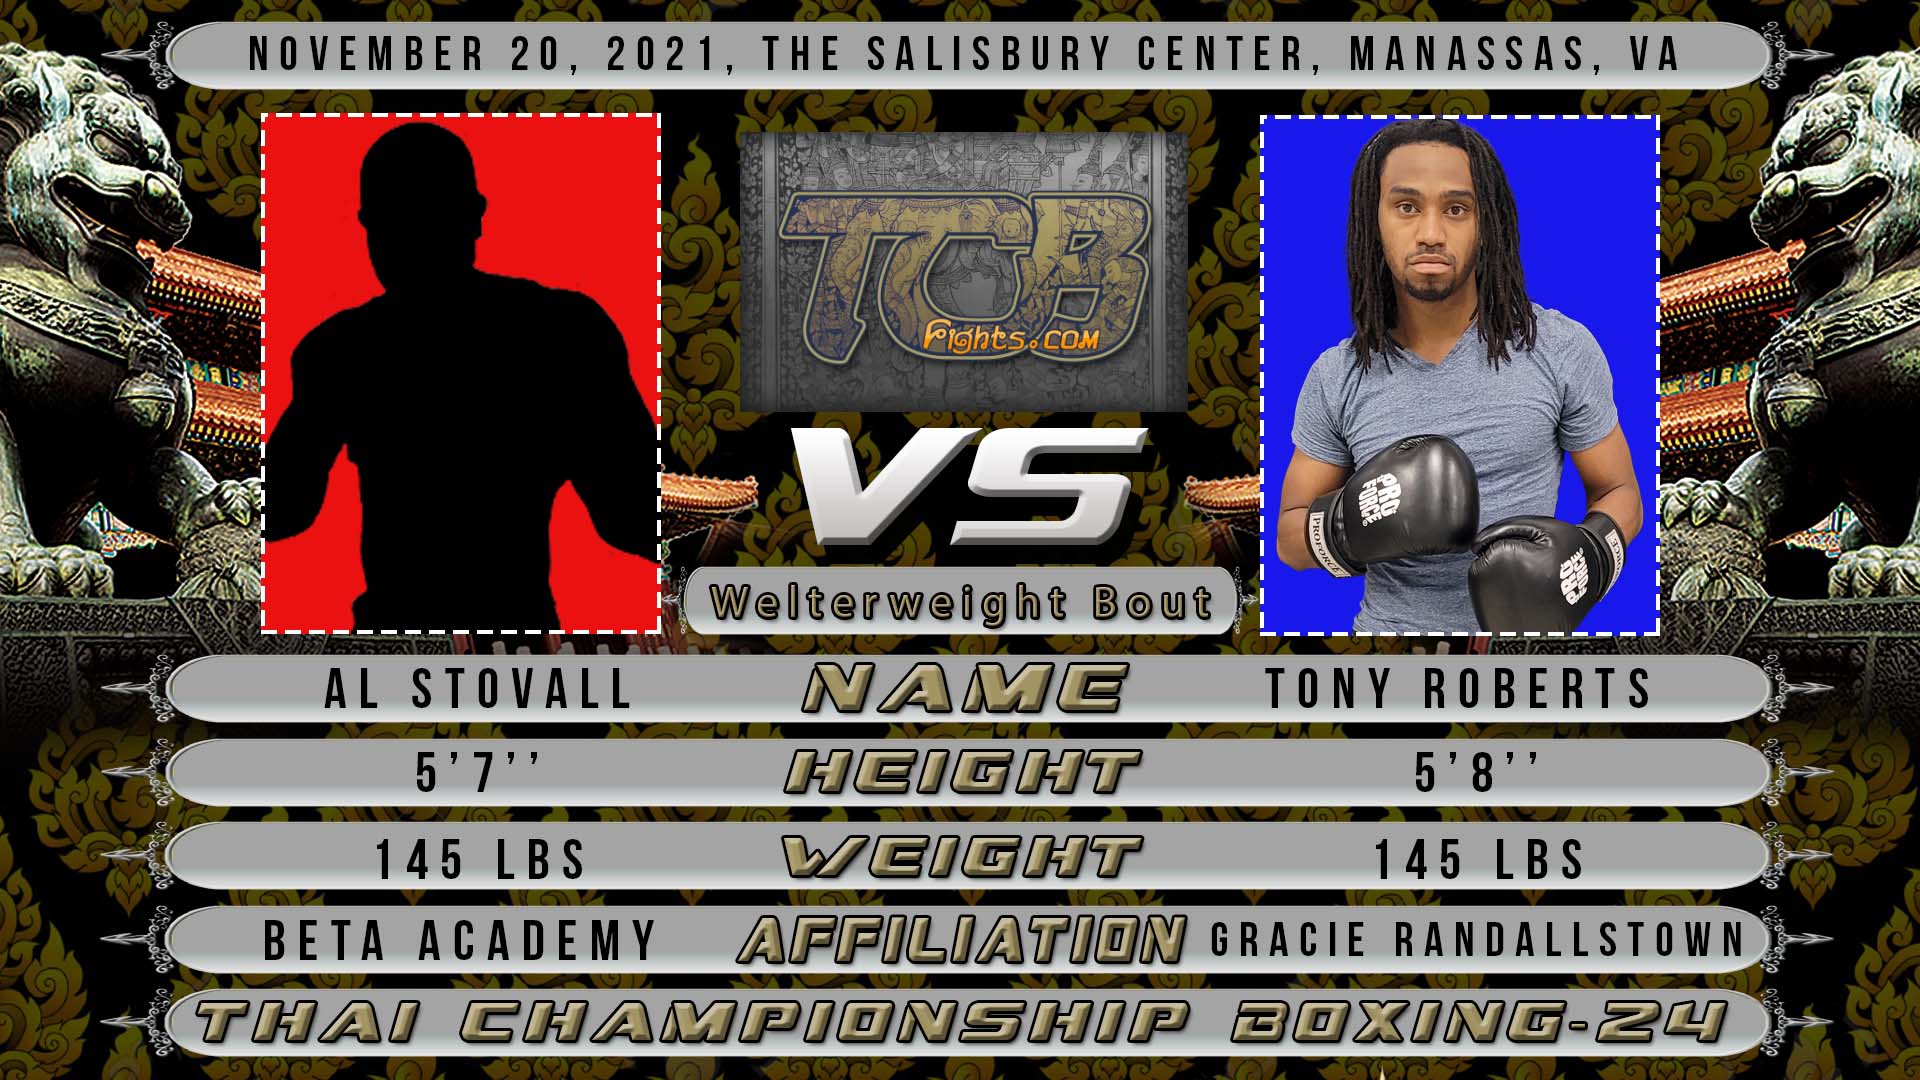 04_Lower_Thirds-TCB-24-Stovall_Vs_Roberts